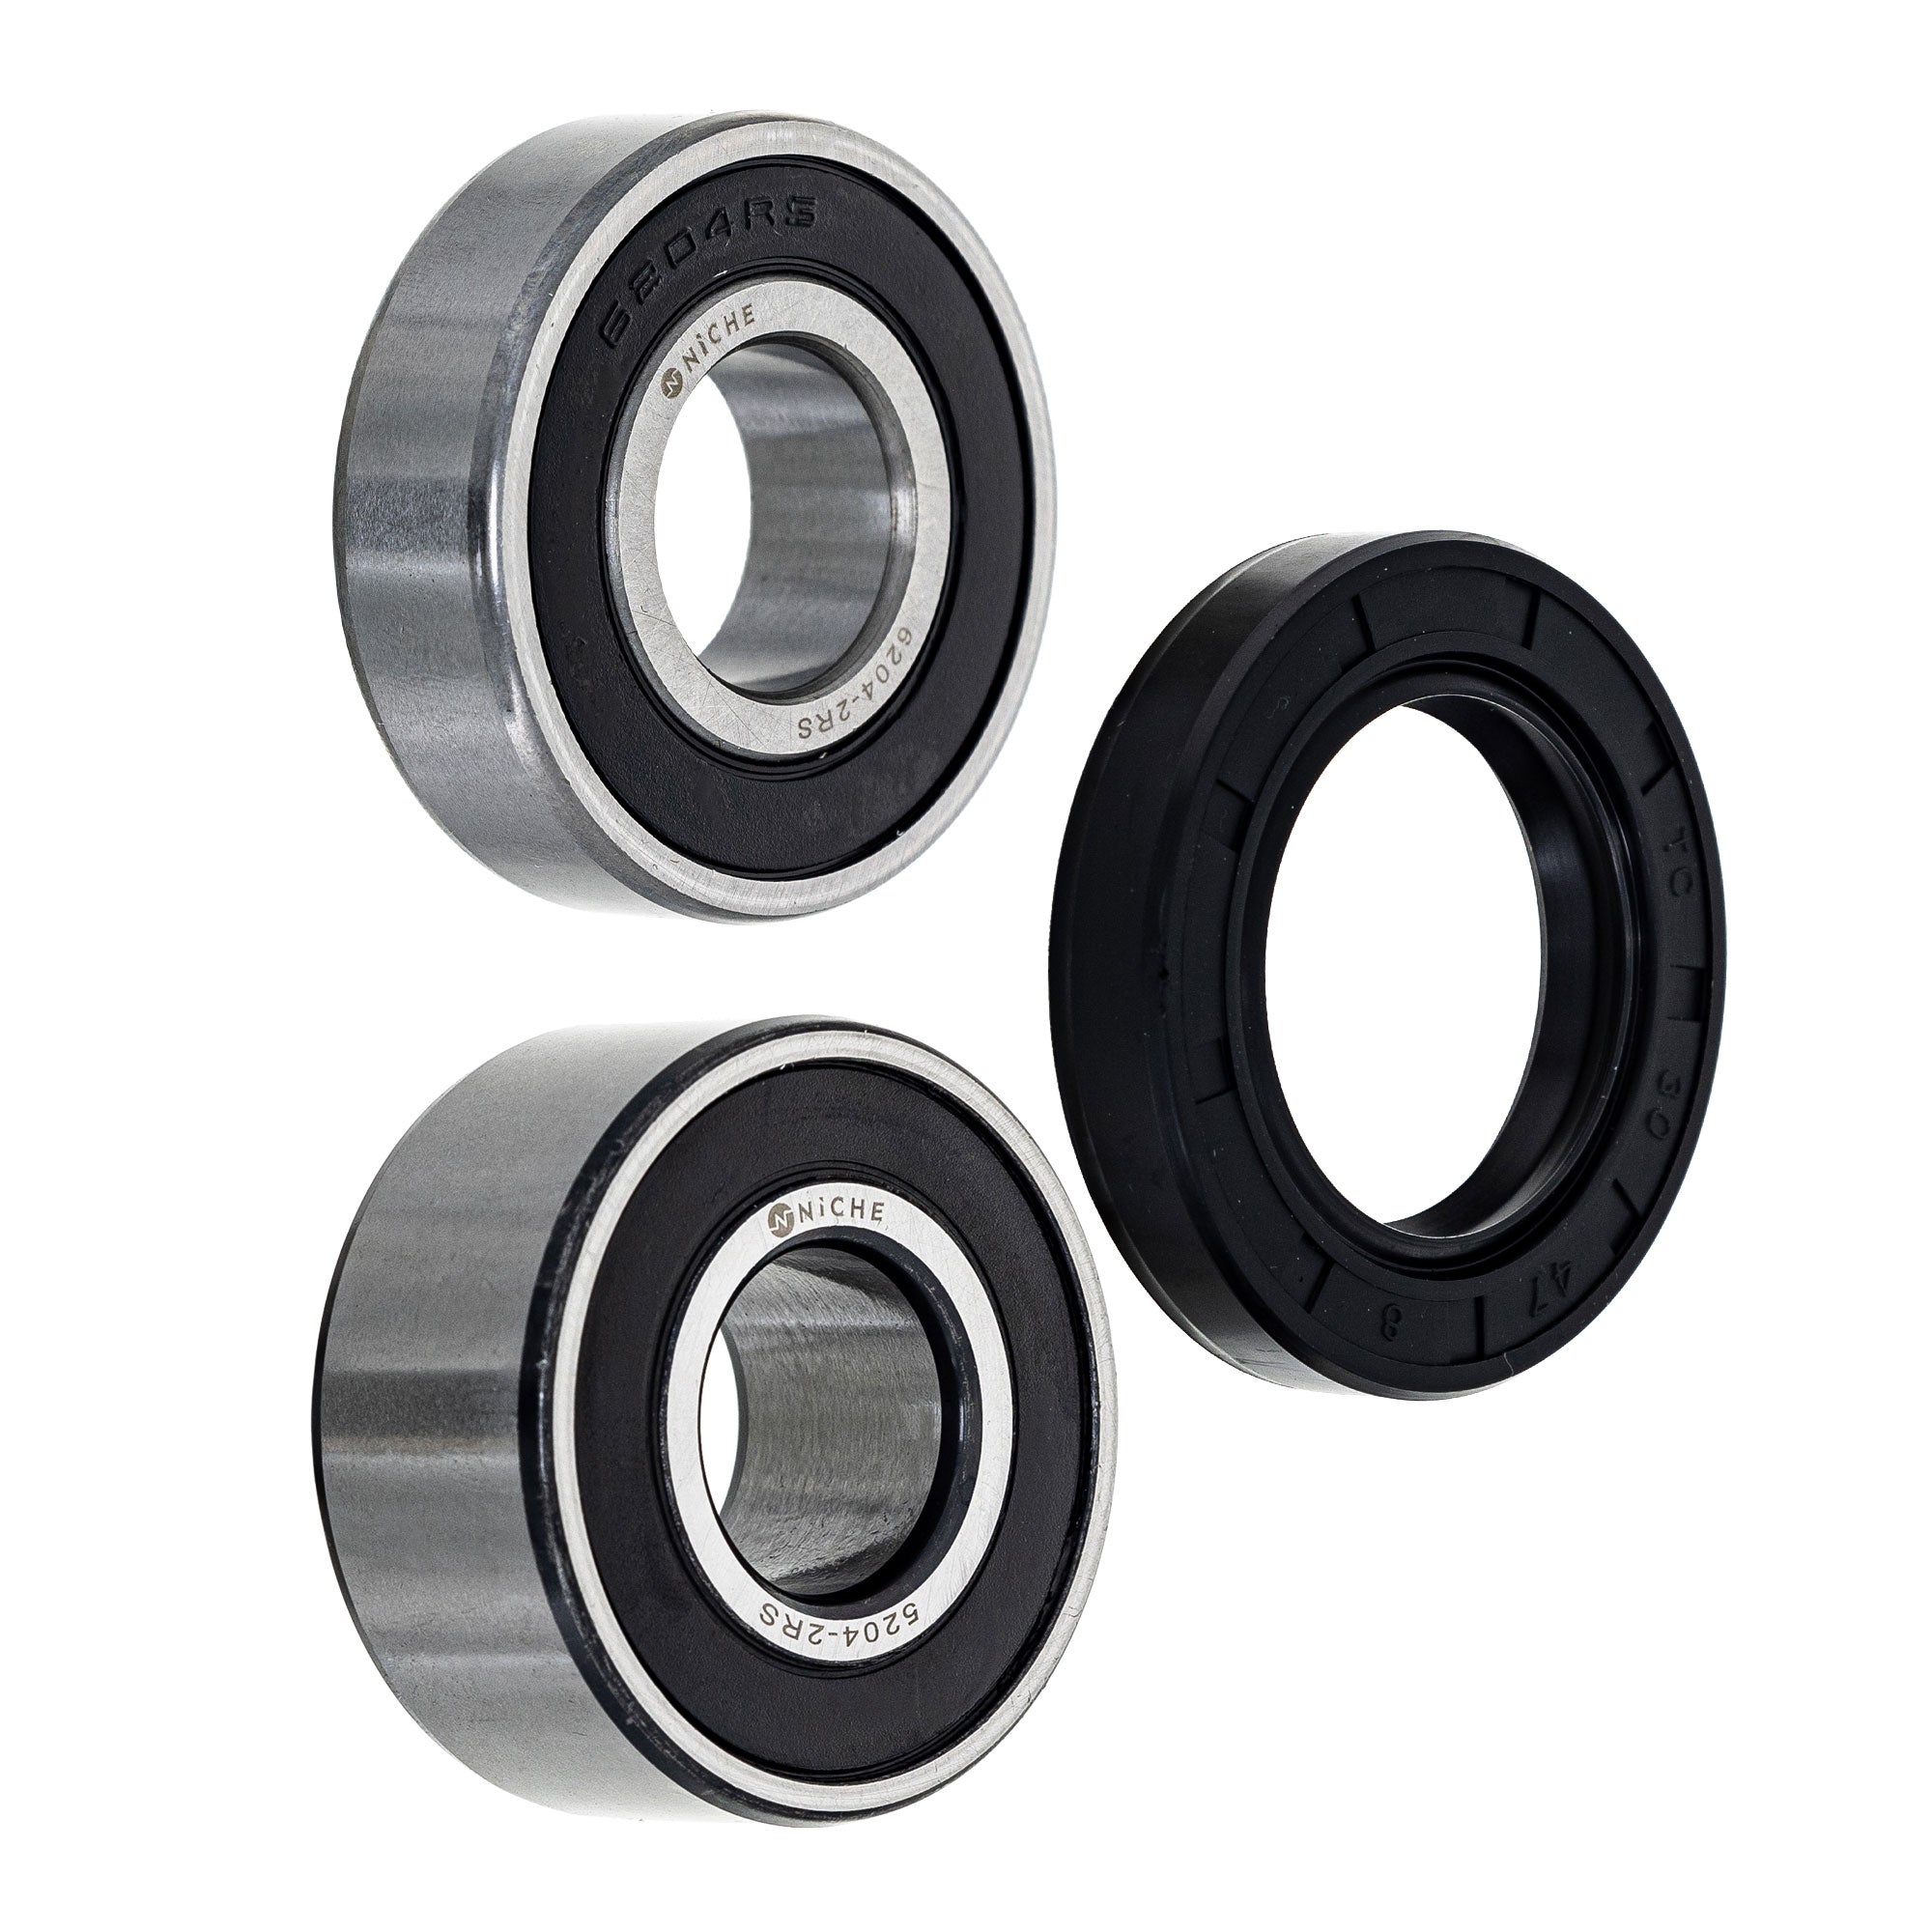 Wheel Bearing Seal Kit for zOTHER Ref No ST1100 Shadow R1150RT R1150RS NICHE MK1009000